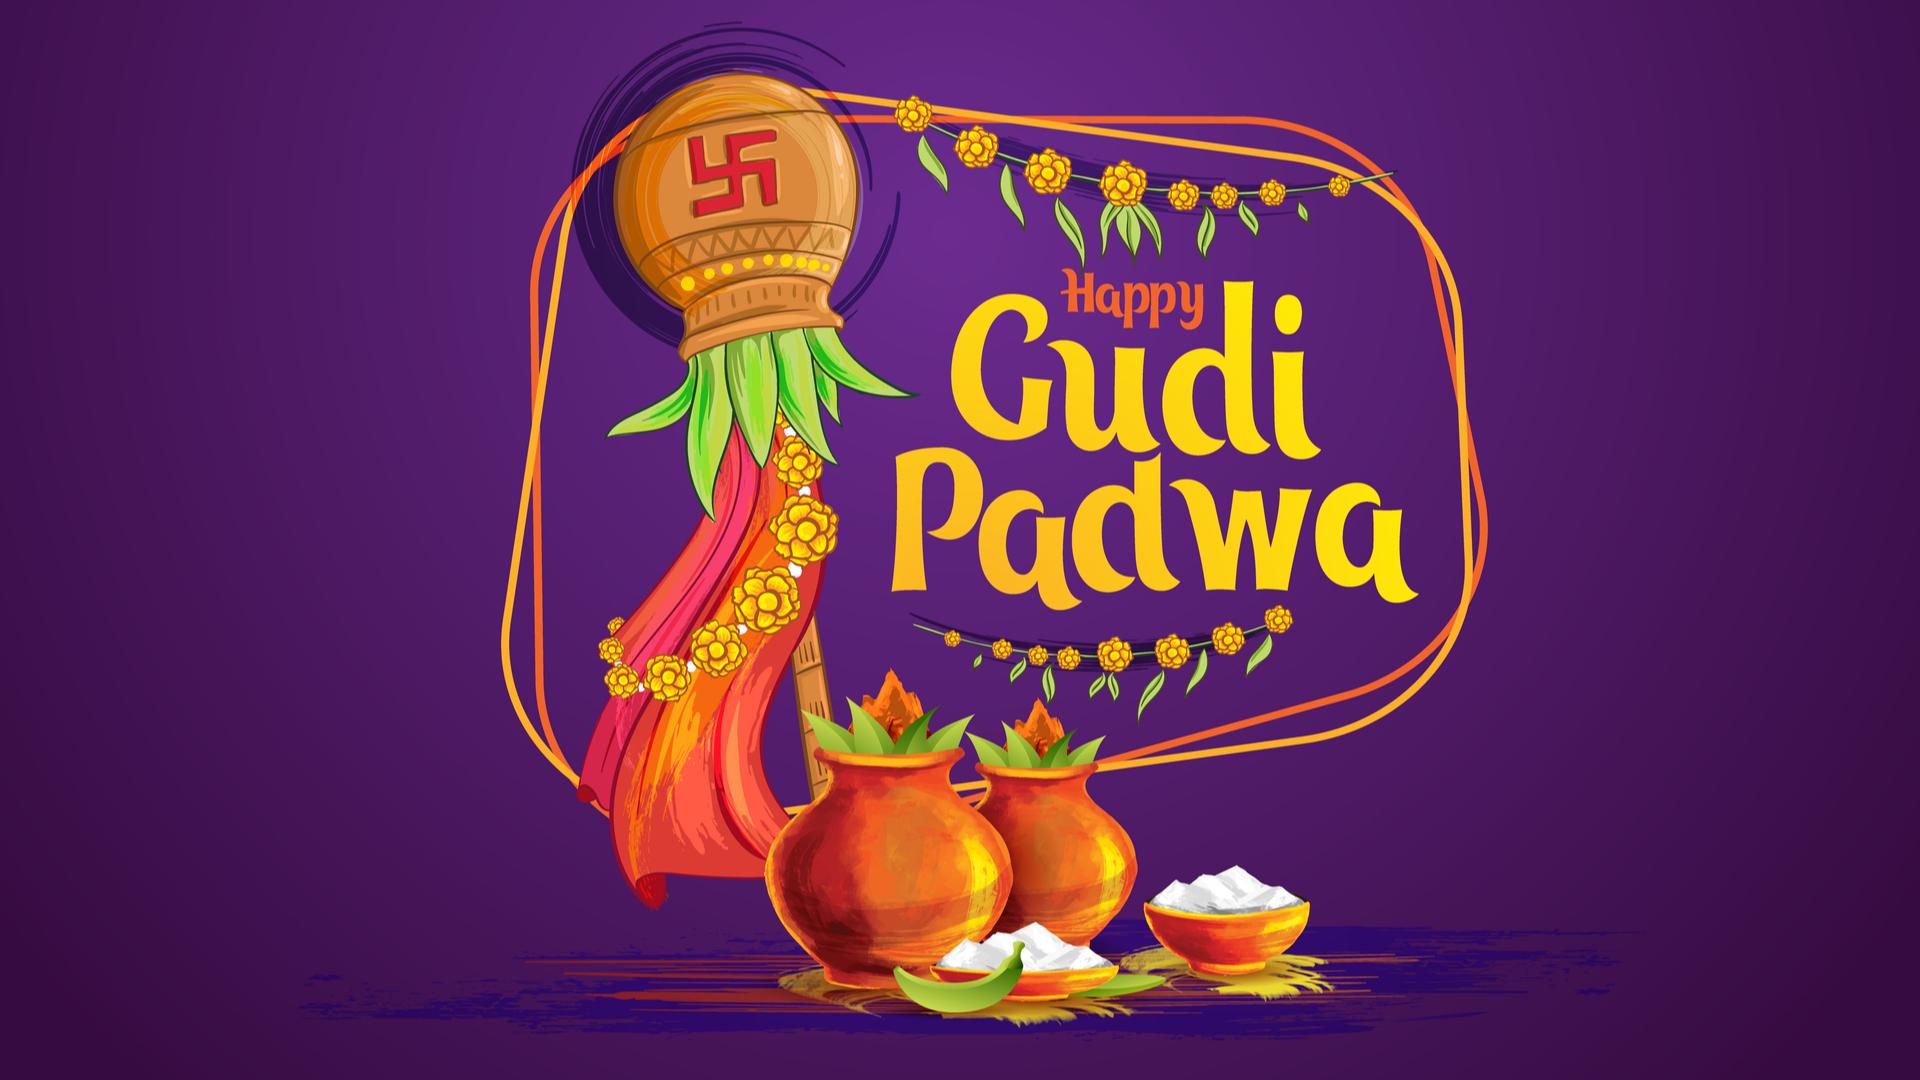 This Gudi Padwa, give your finances a fresh start